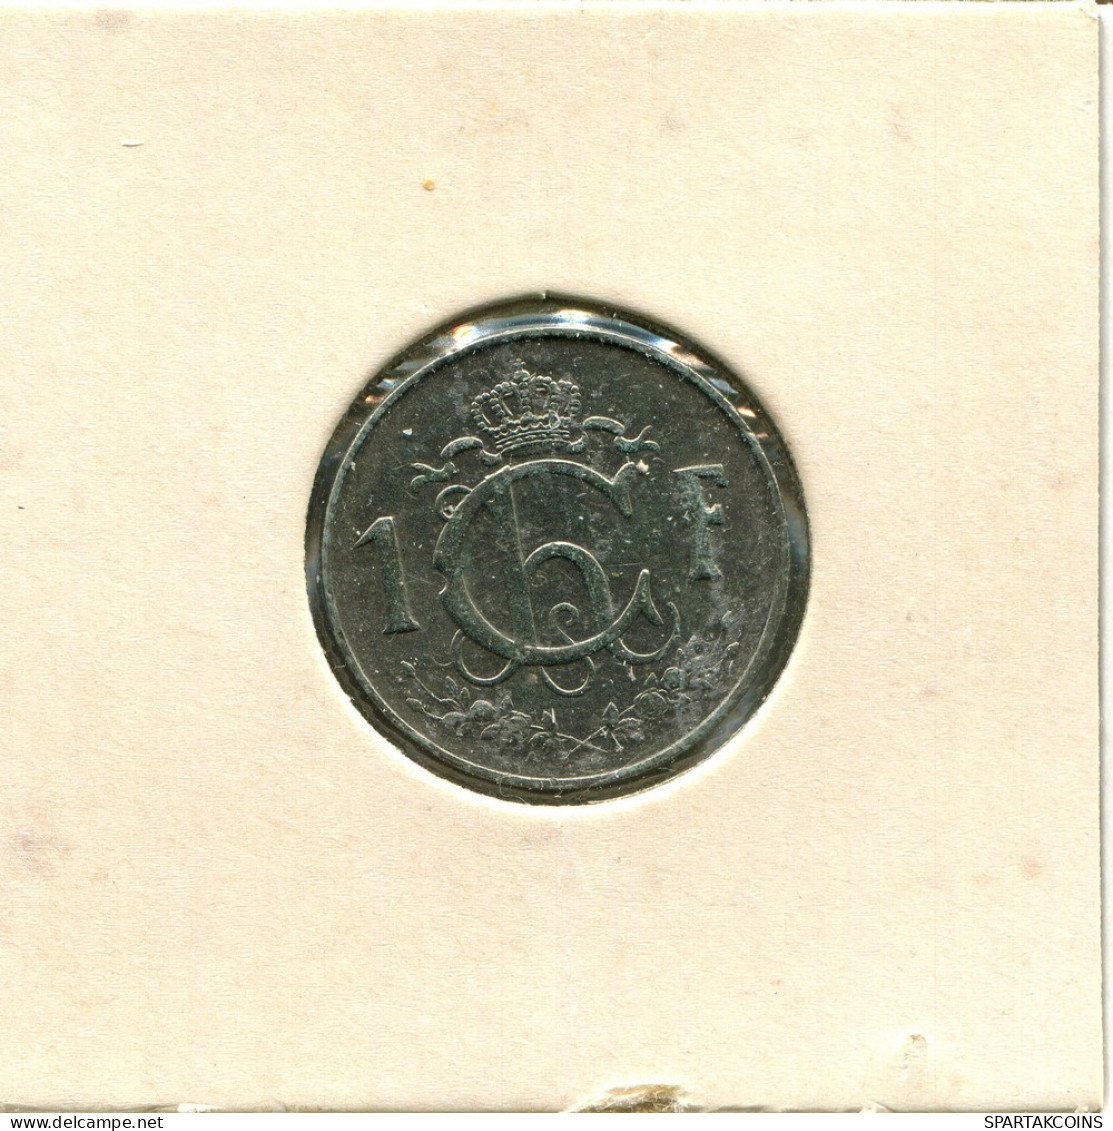 1 FRANC 1964 LUXEMBURGO LUXEMBOURG Moneda #AT205.E.A - Luxembourg